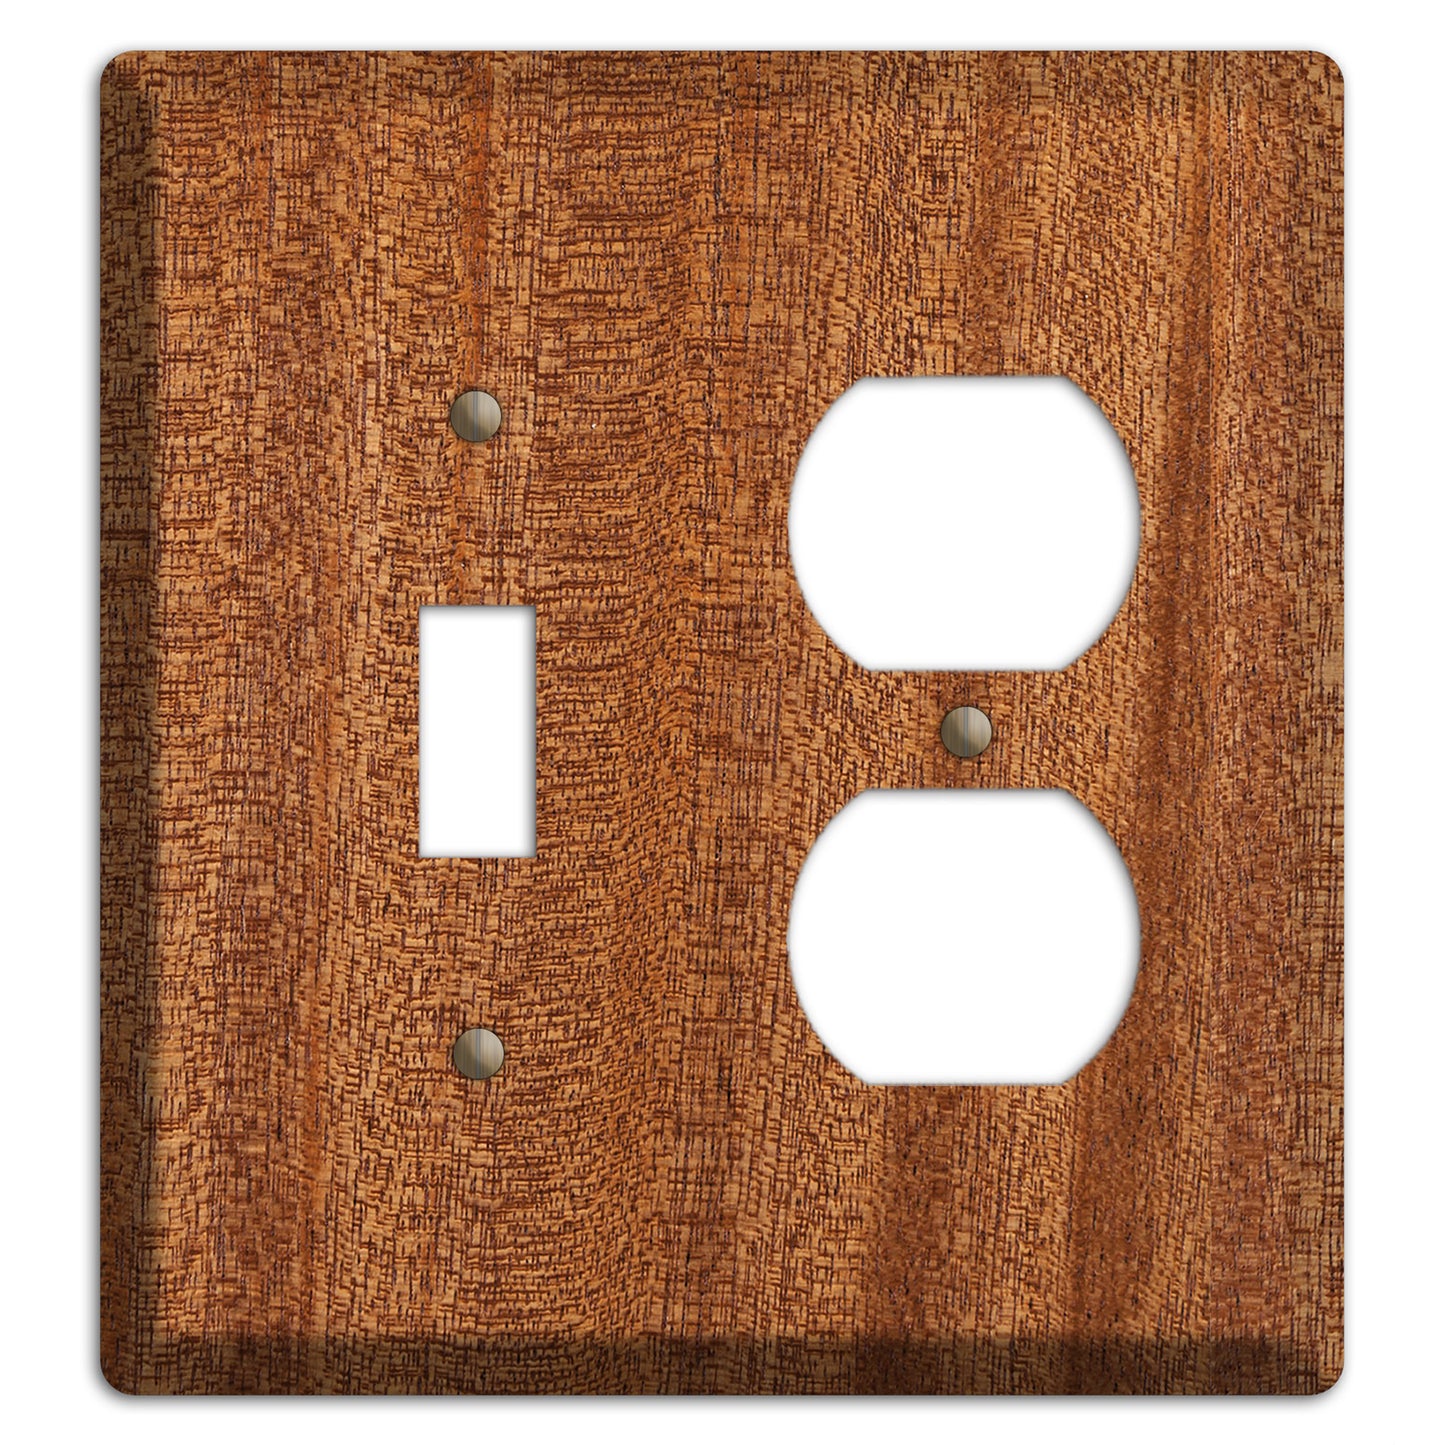 Mahogany Wood Toggle / Duplex Outlet Cover Plate